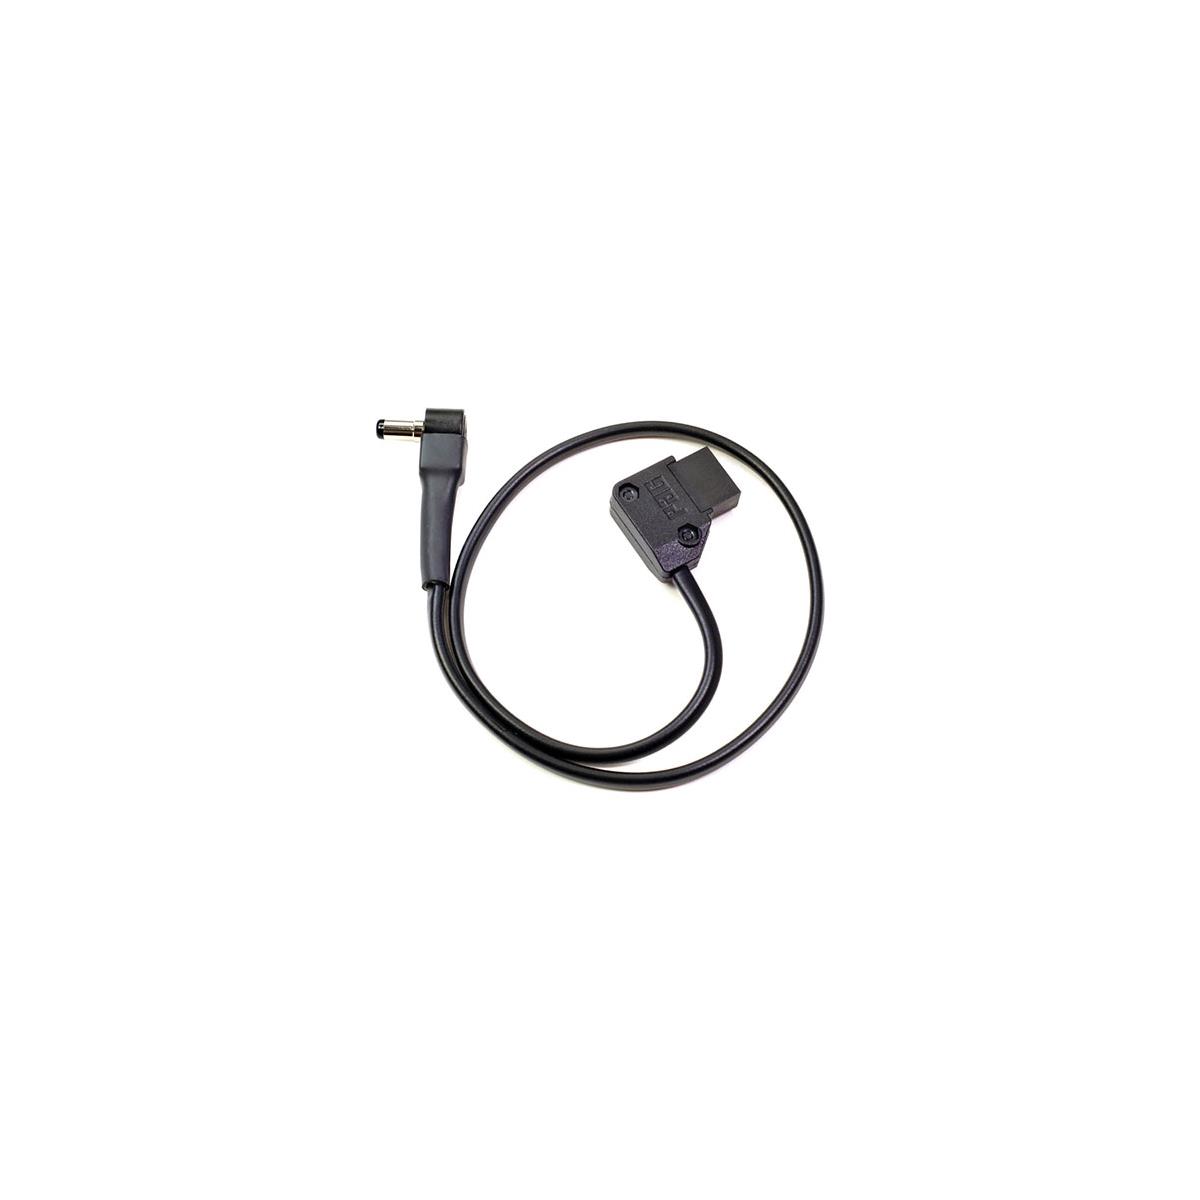 Image of Pag PAG Link D-Tap Power Lead for Blackmagic Cinema Camera